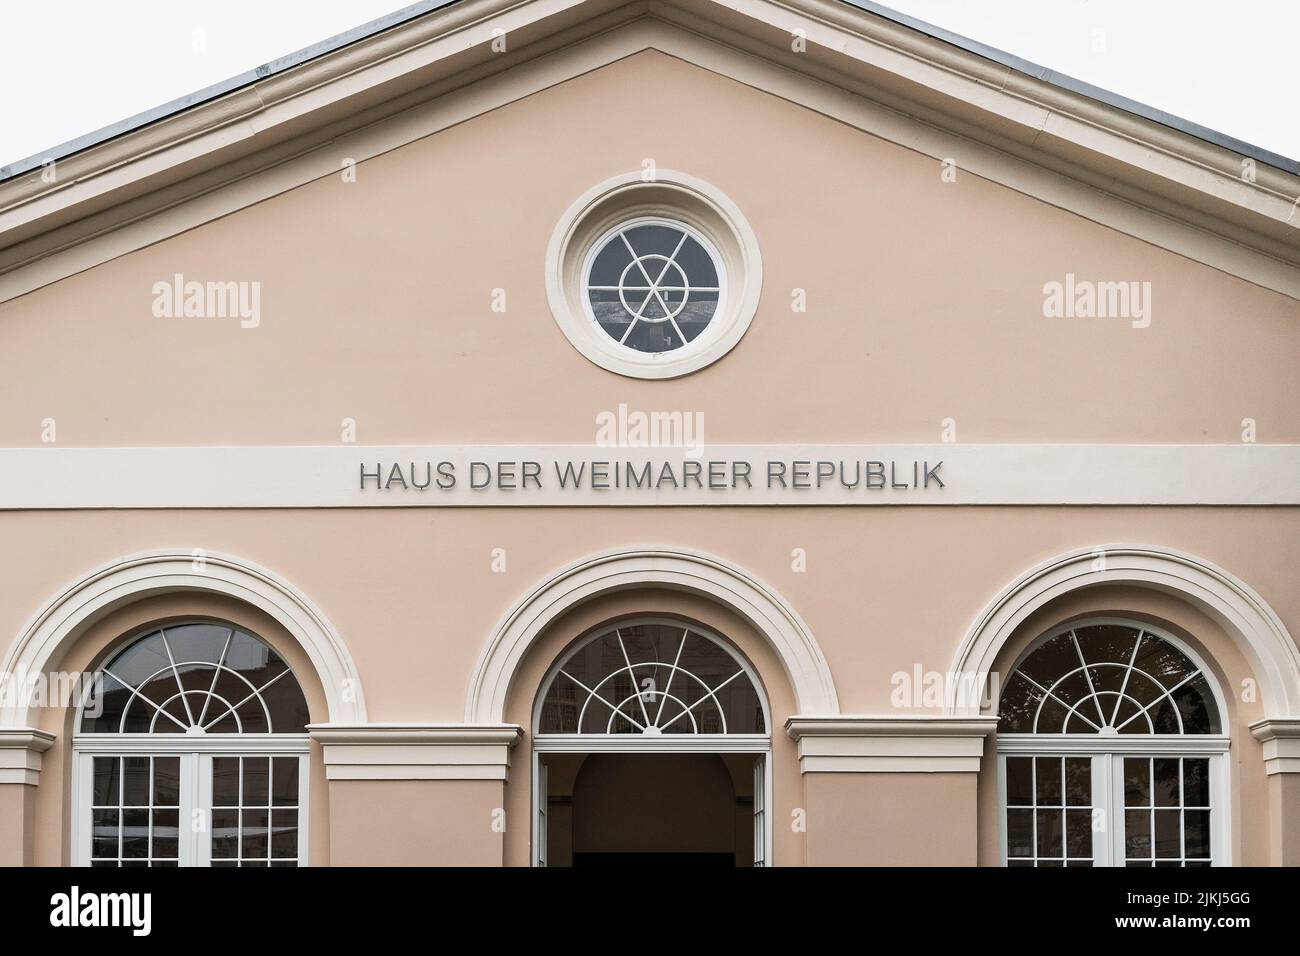 Weimar, Thuringia, theater square, house of the Weimar Republic, lettering Stock Photo